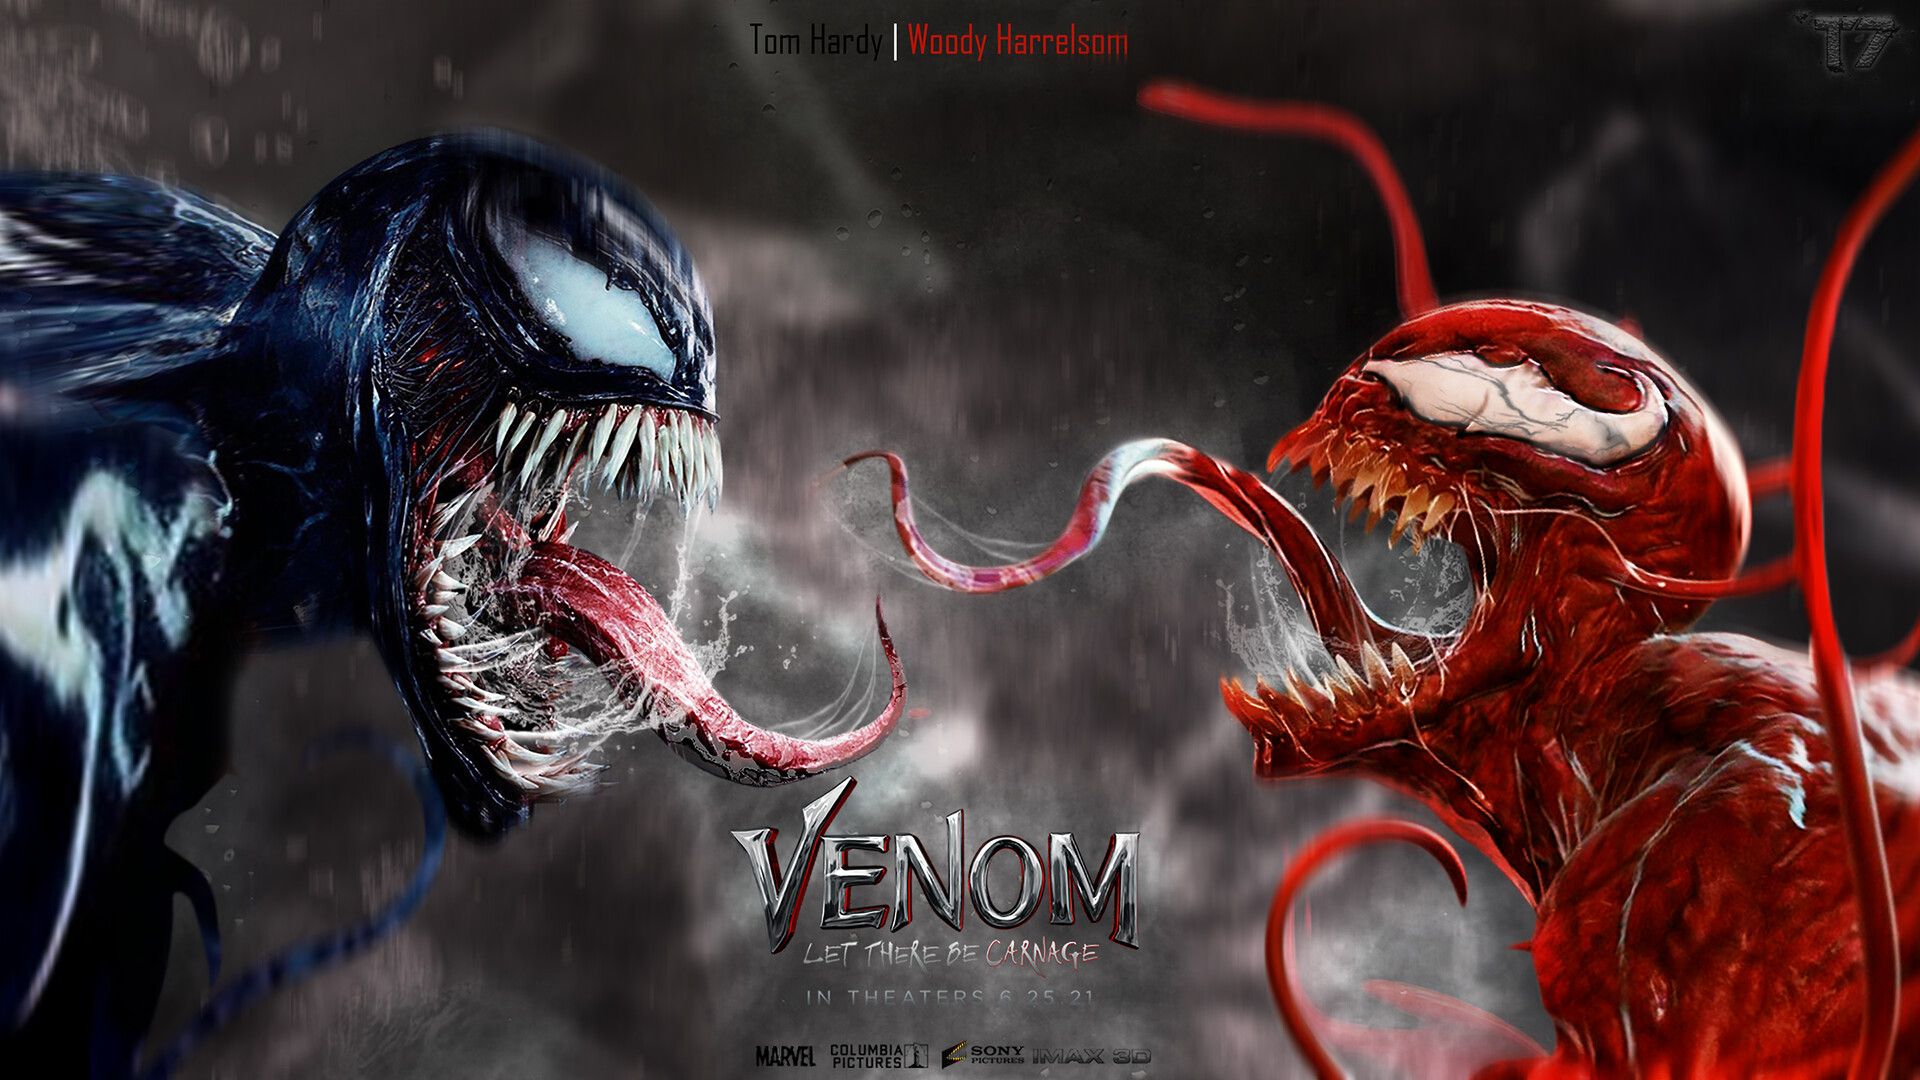 Venom Let There Be Carnage 4K Digital Art 2021 Wallpapers